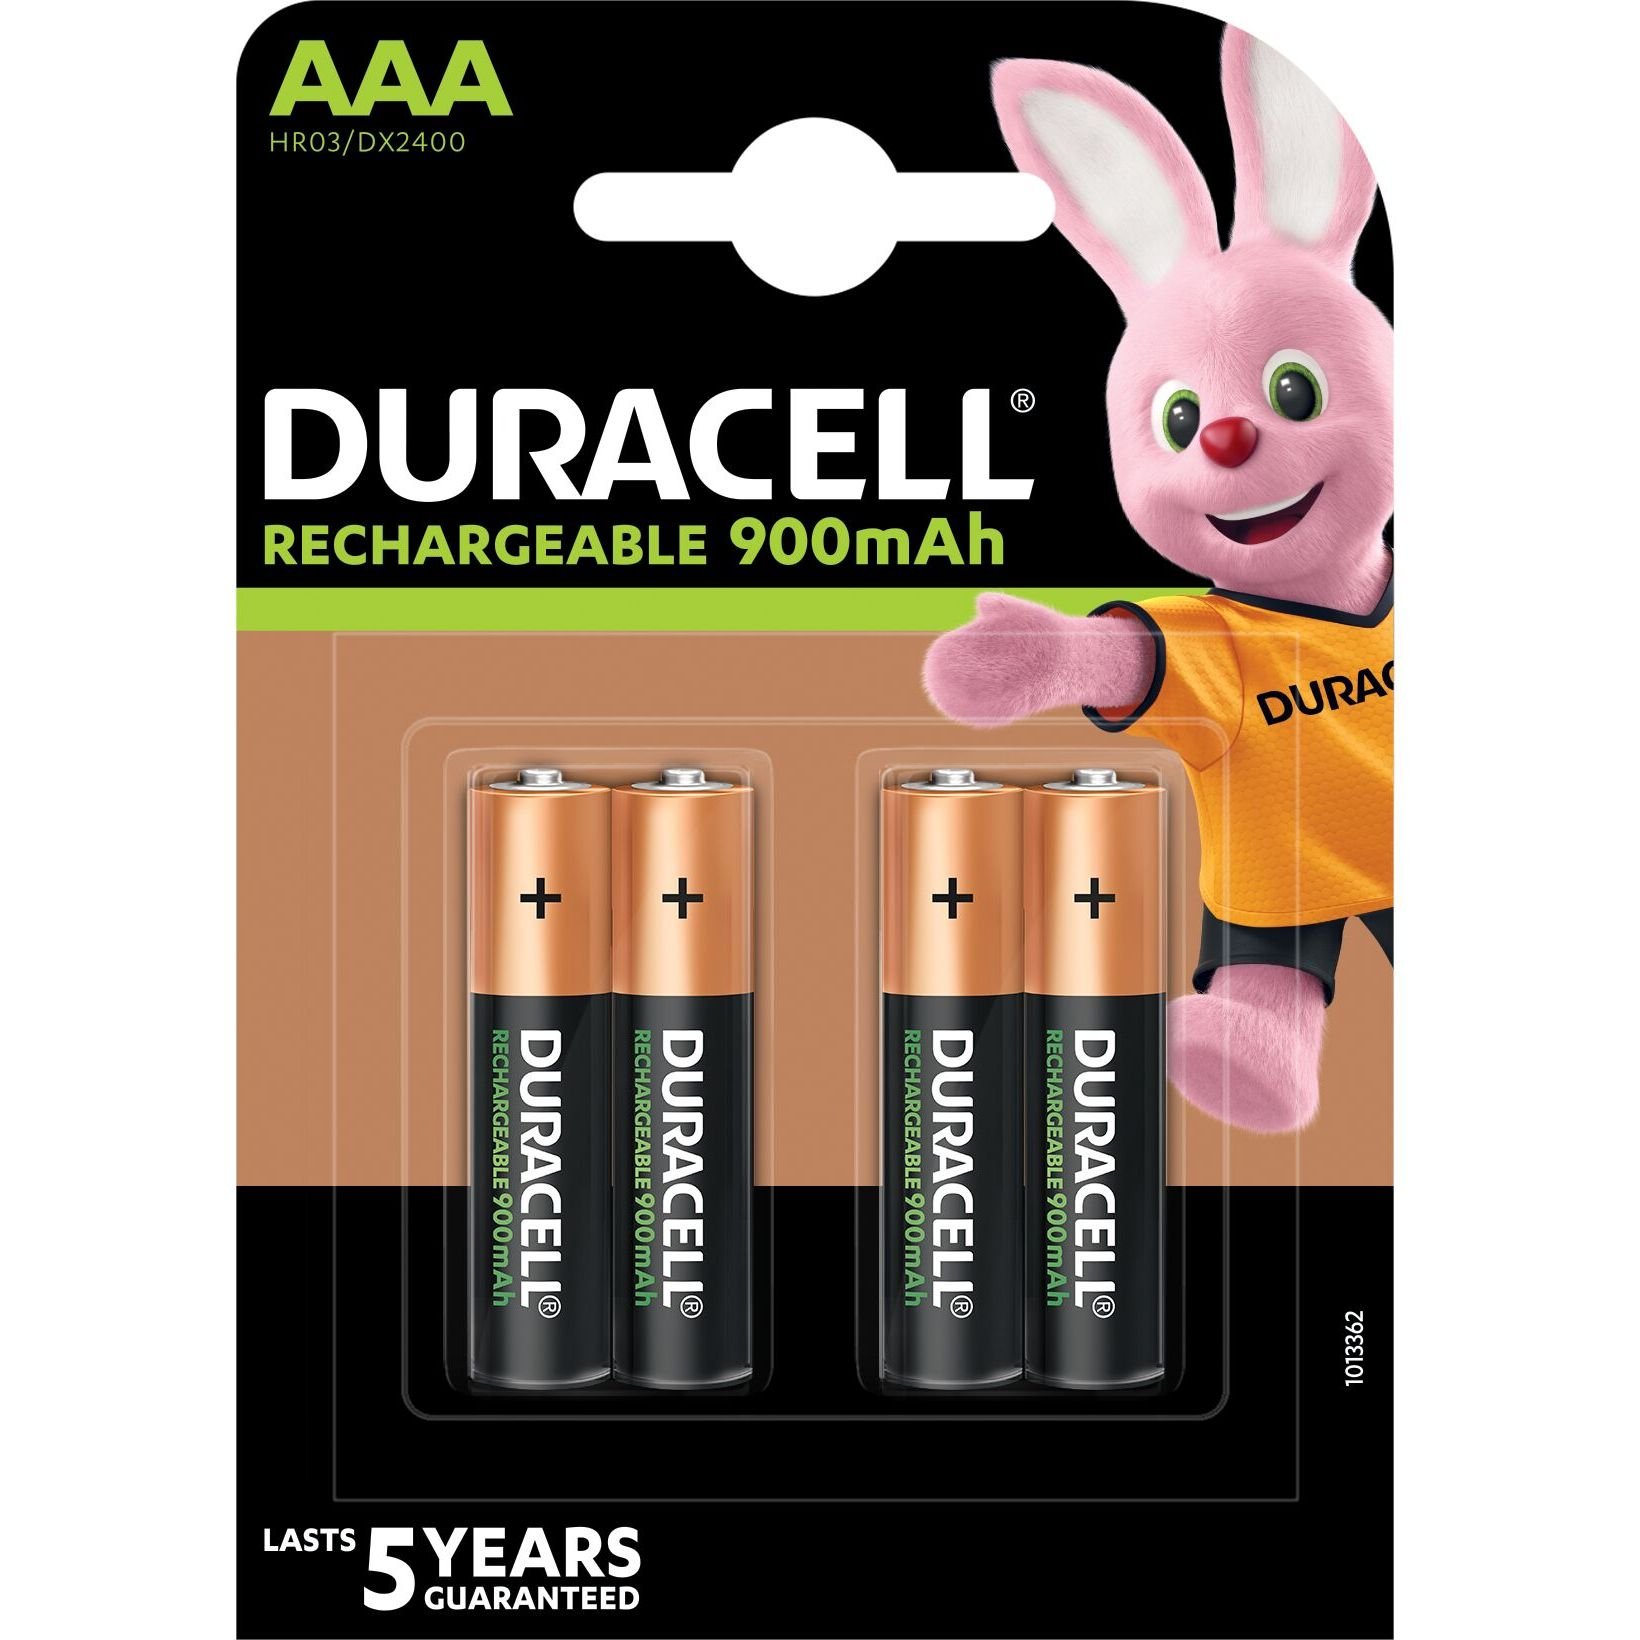 Акумулятори Duracell Rechargeable AAA 900 mAh HR03/DX2400, 4 шт. (5005015) - фото 2